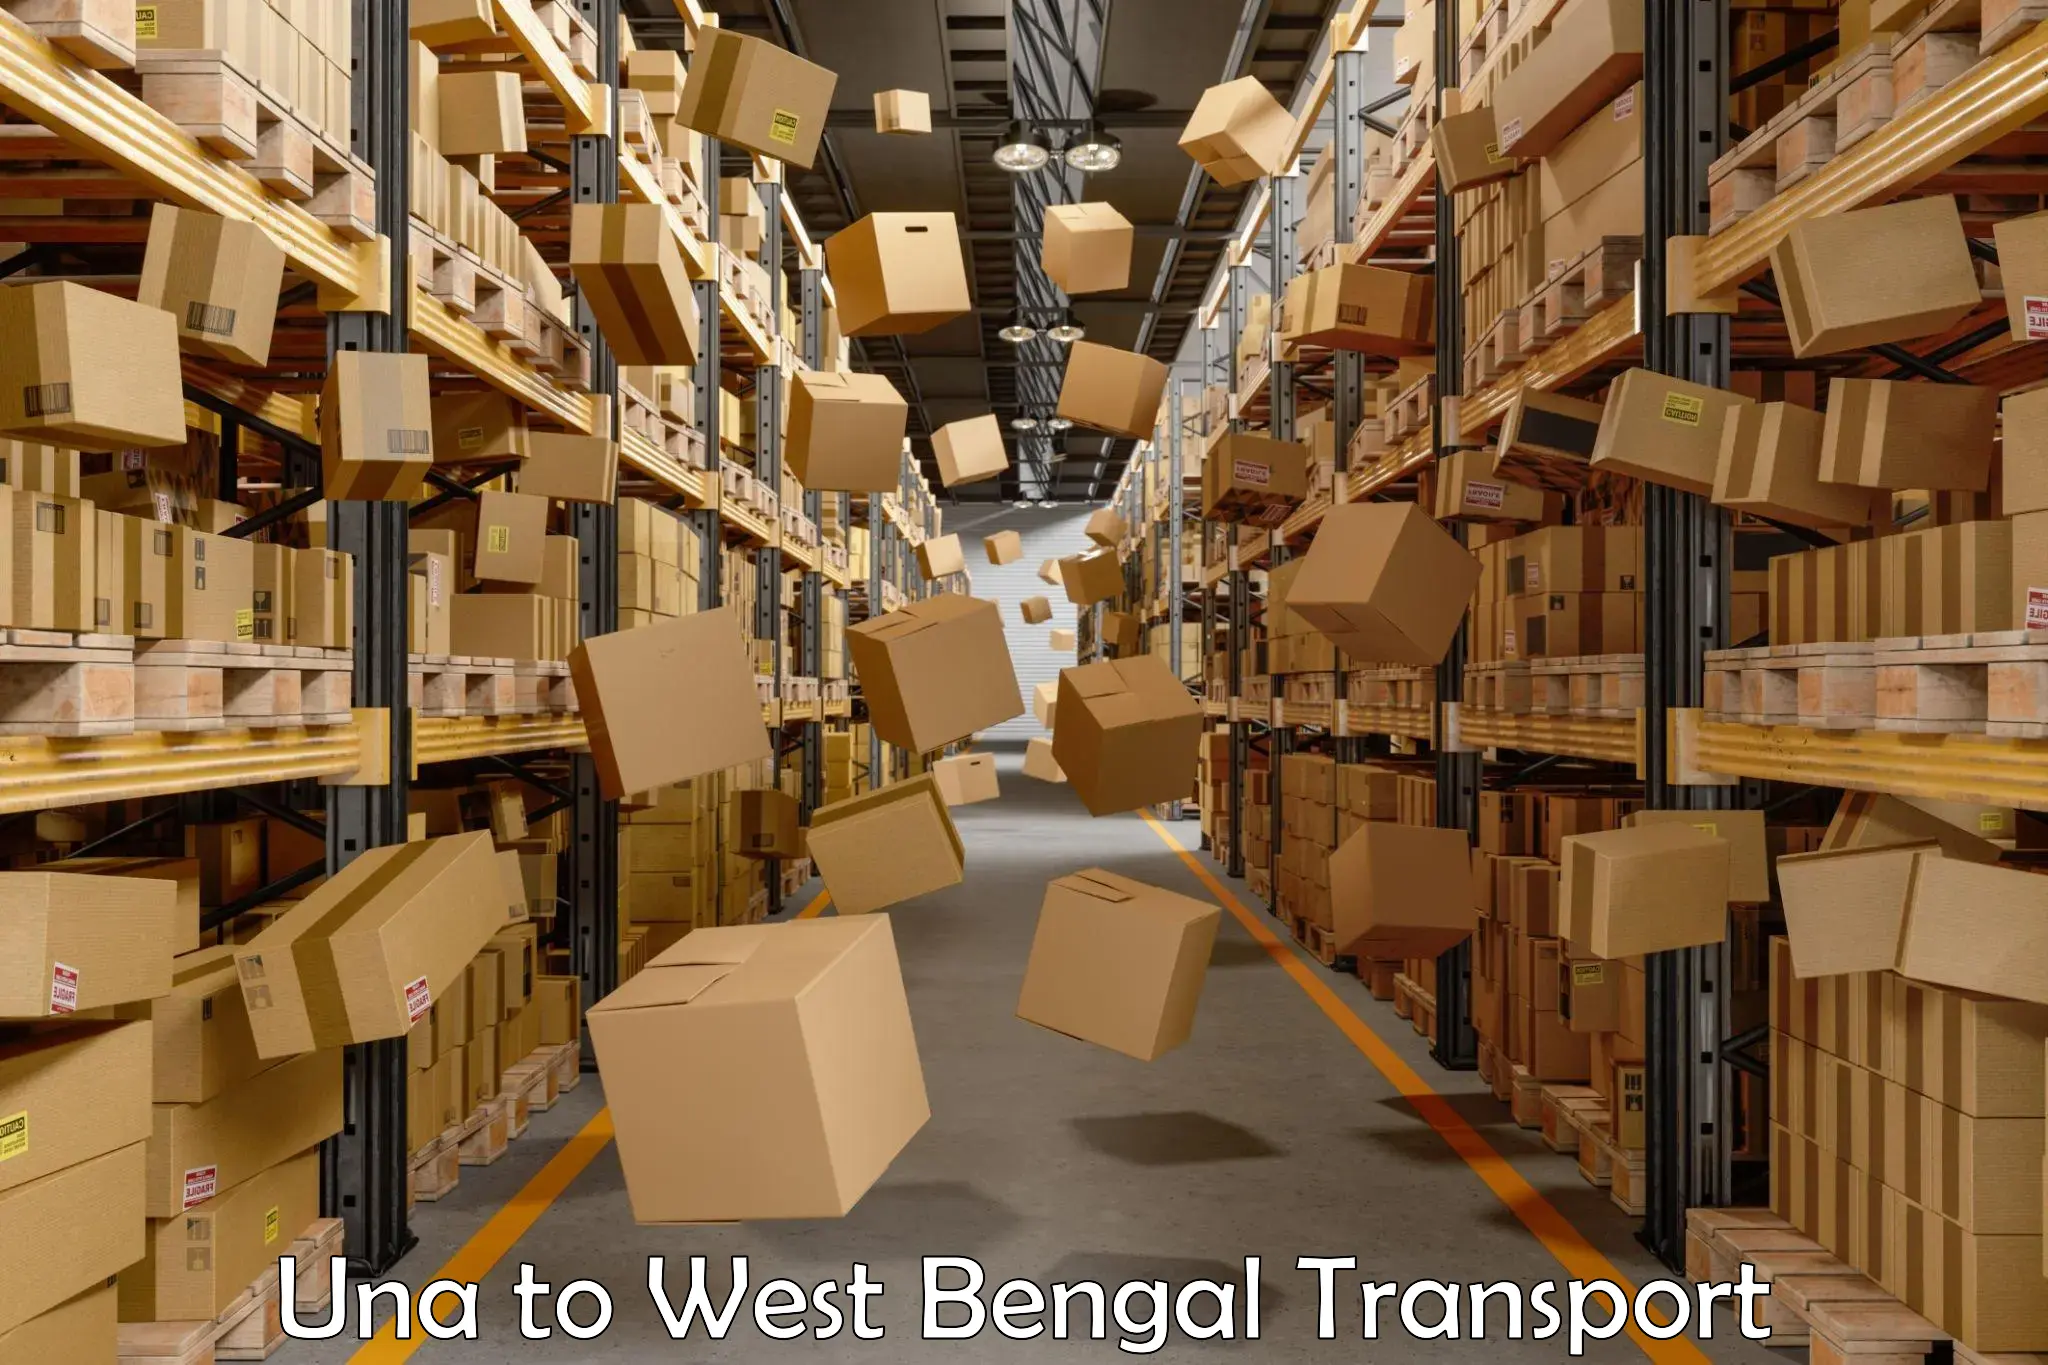 Container transport service Una to West Bengal